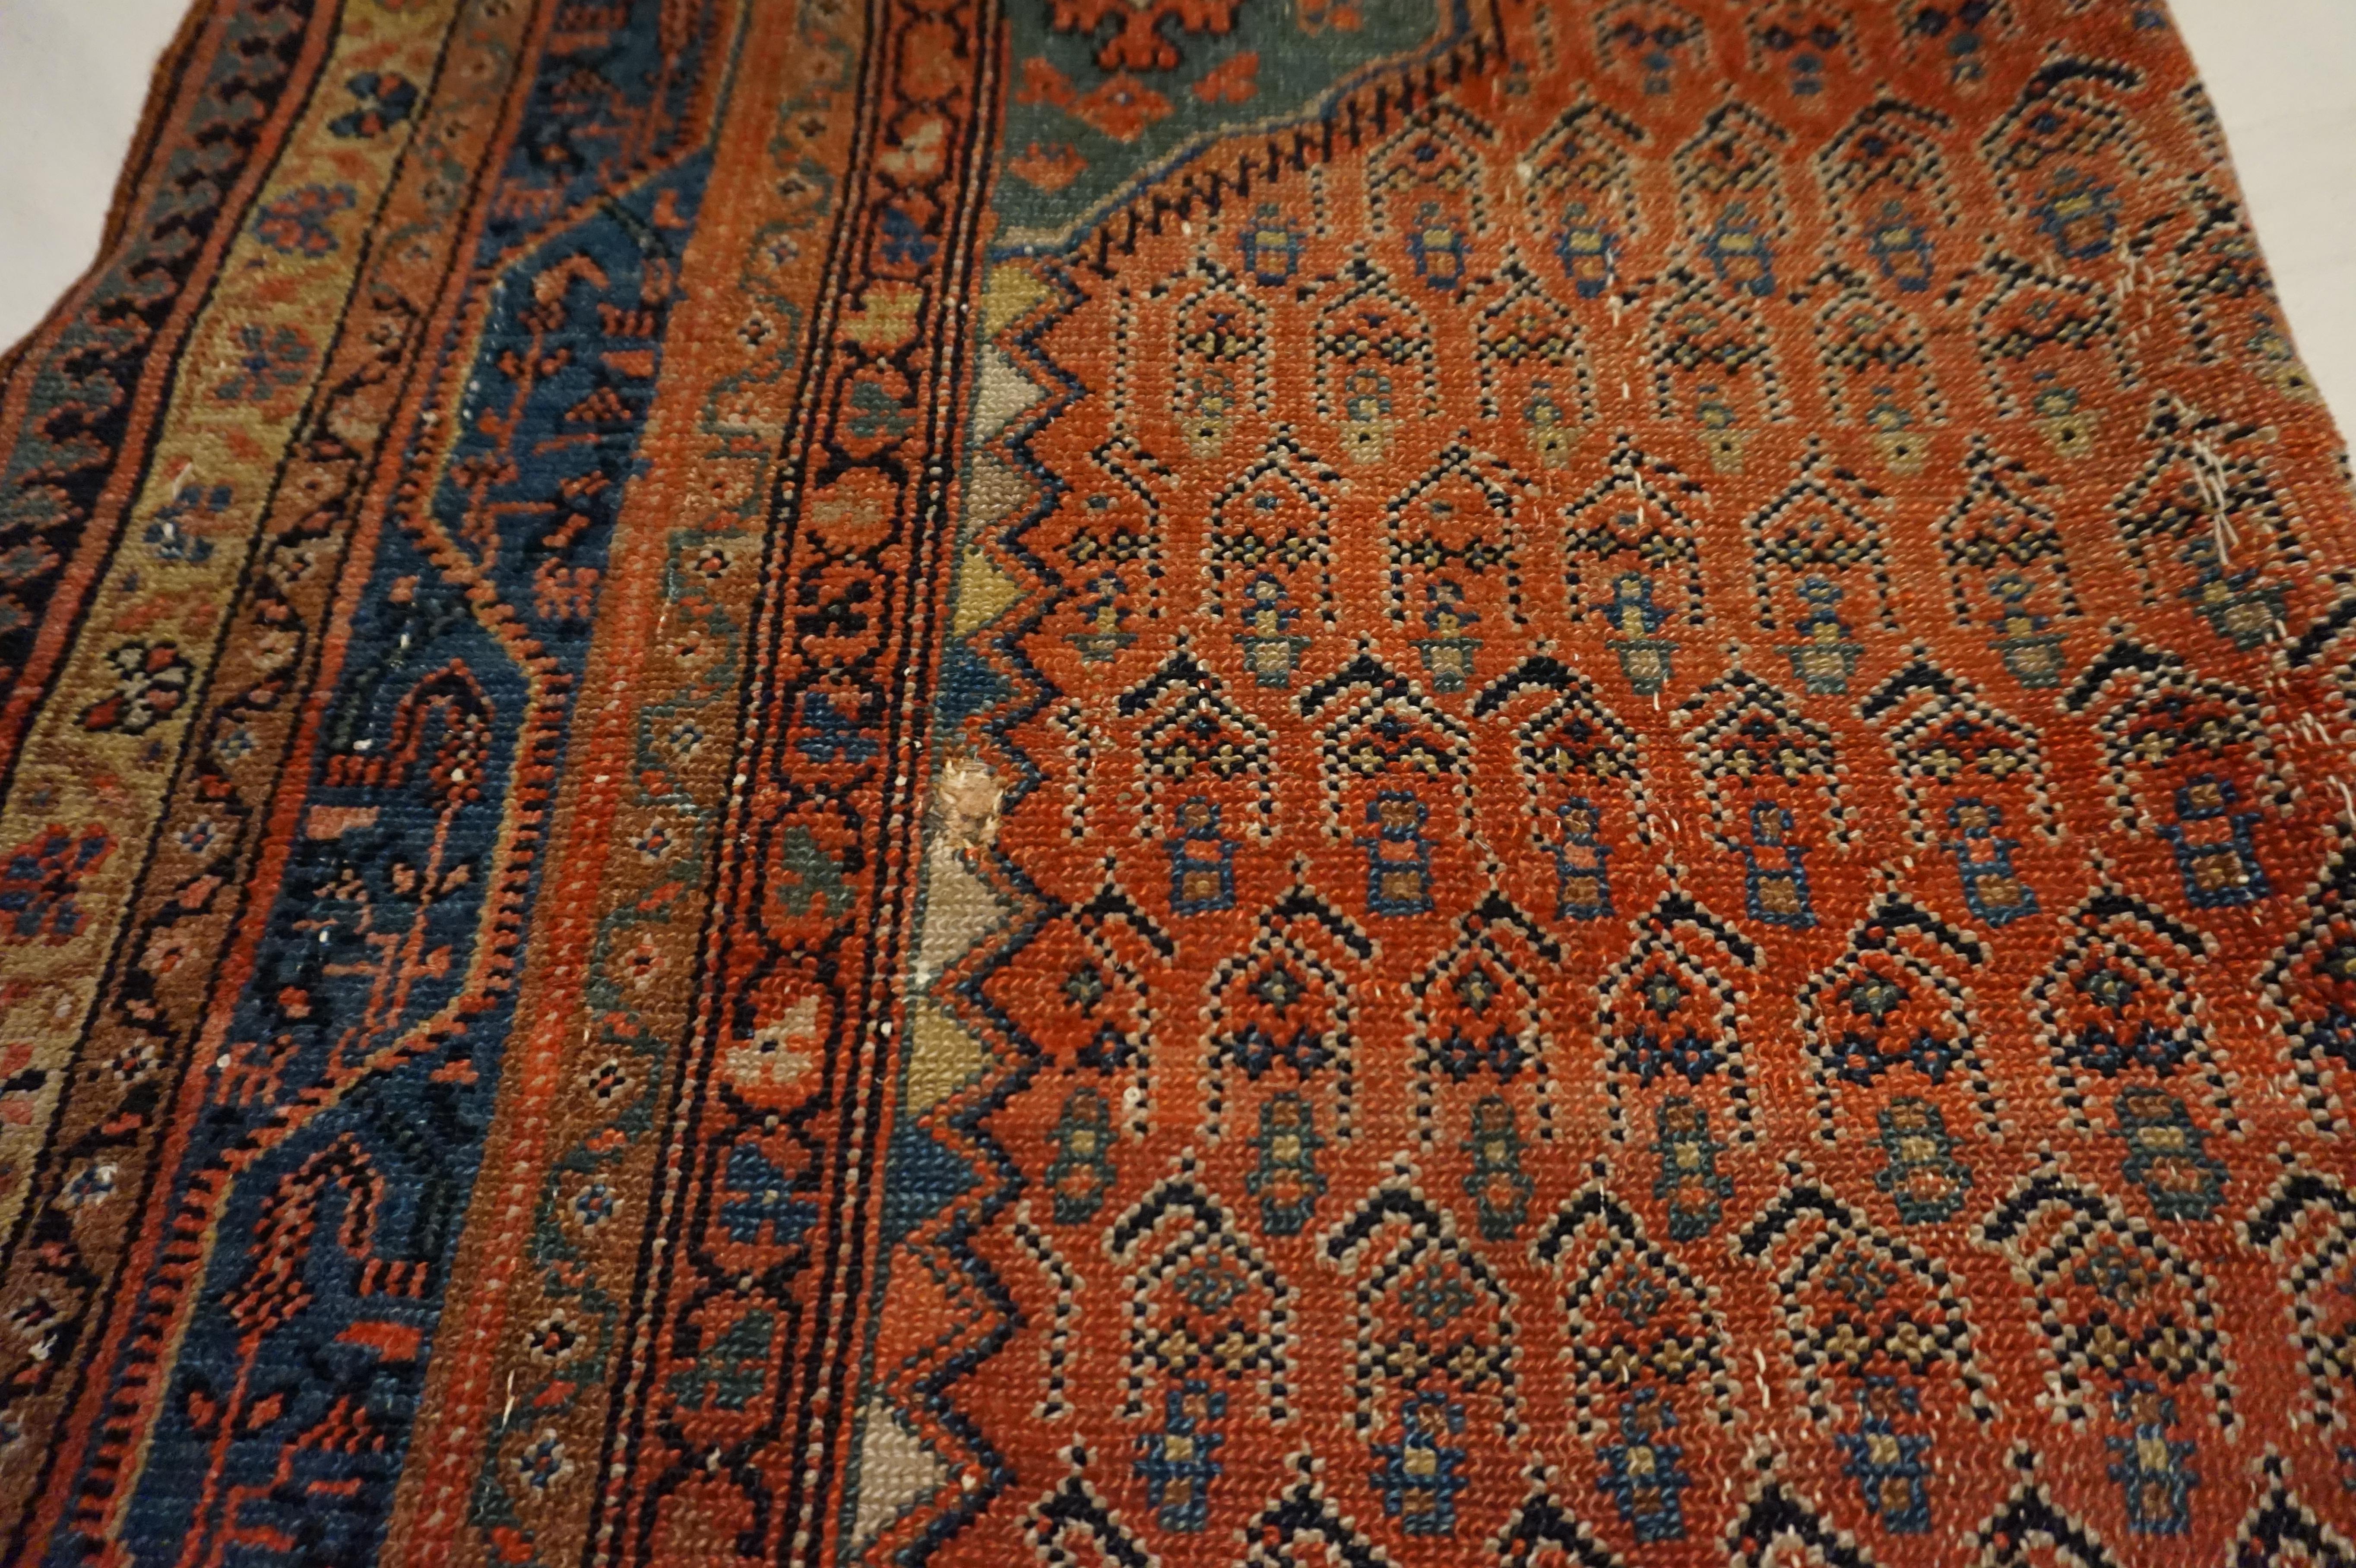 19th Century Tribal Boteh Paisley Hand-knotted Rug In Rust Hues For Sale 8